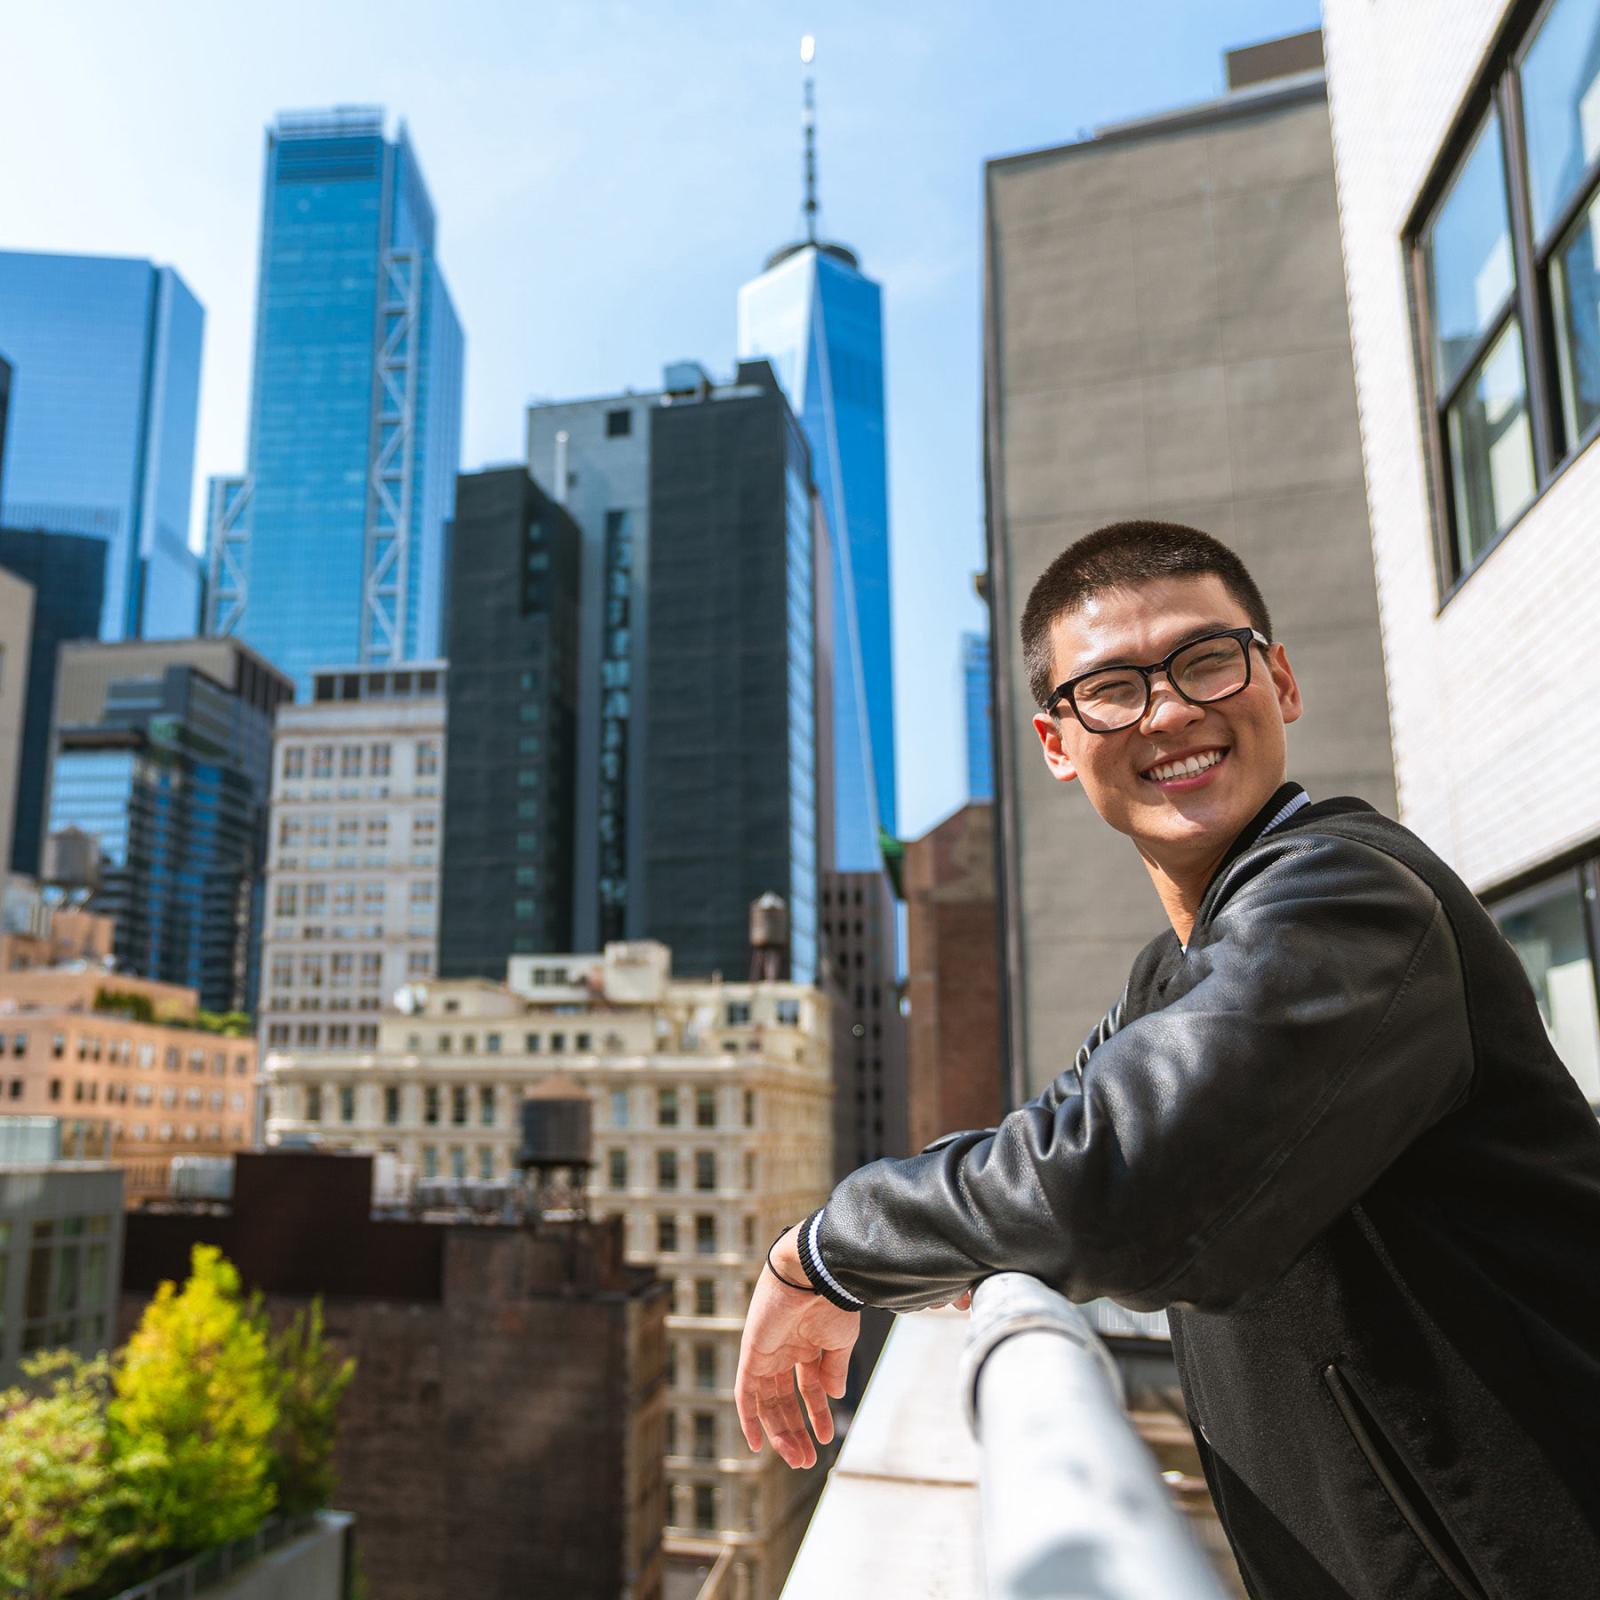 a Pace student leans on a balcony with Manhattan buildings in the background